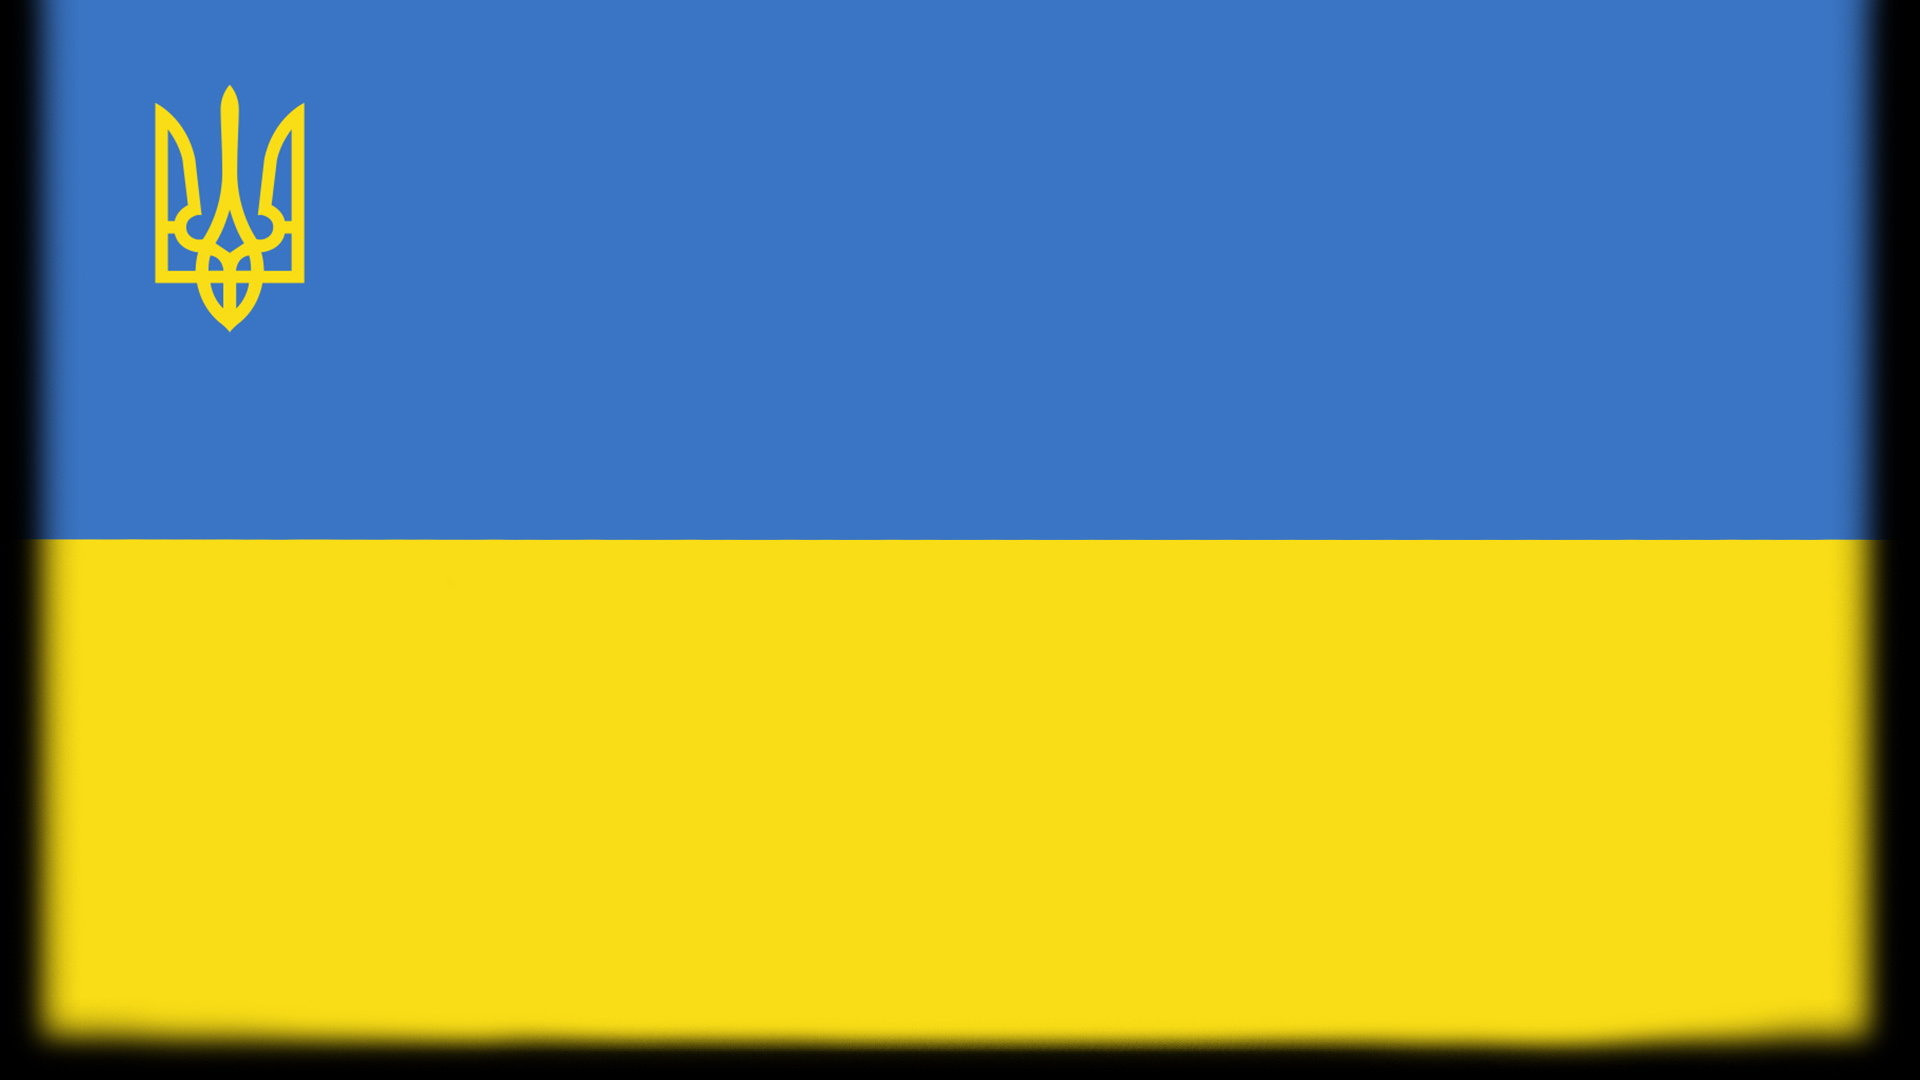 Ukraine Flag Wallpapers on Independence Day Events